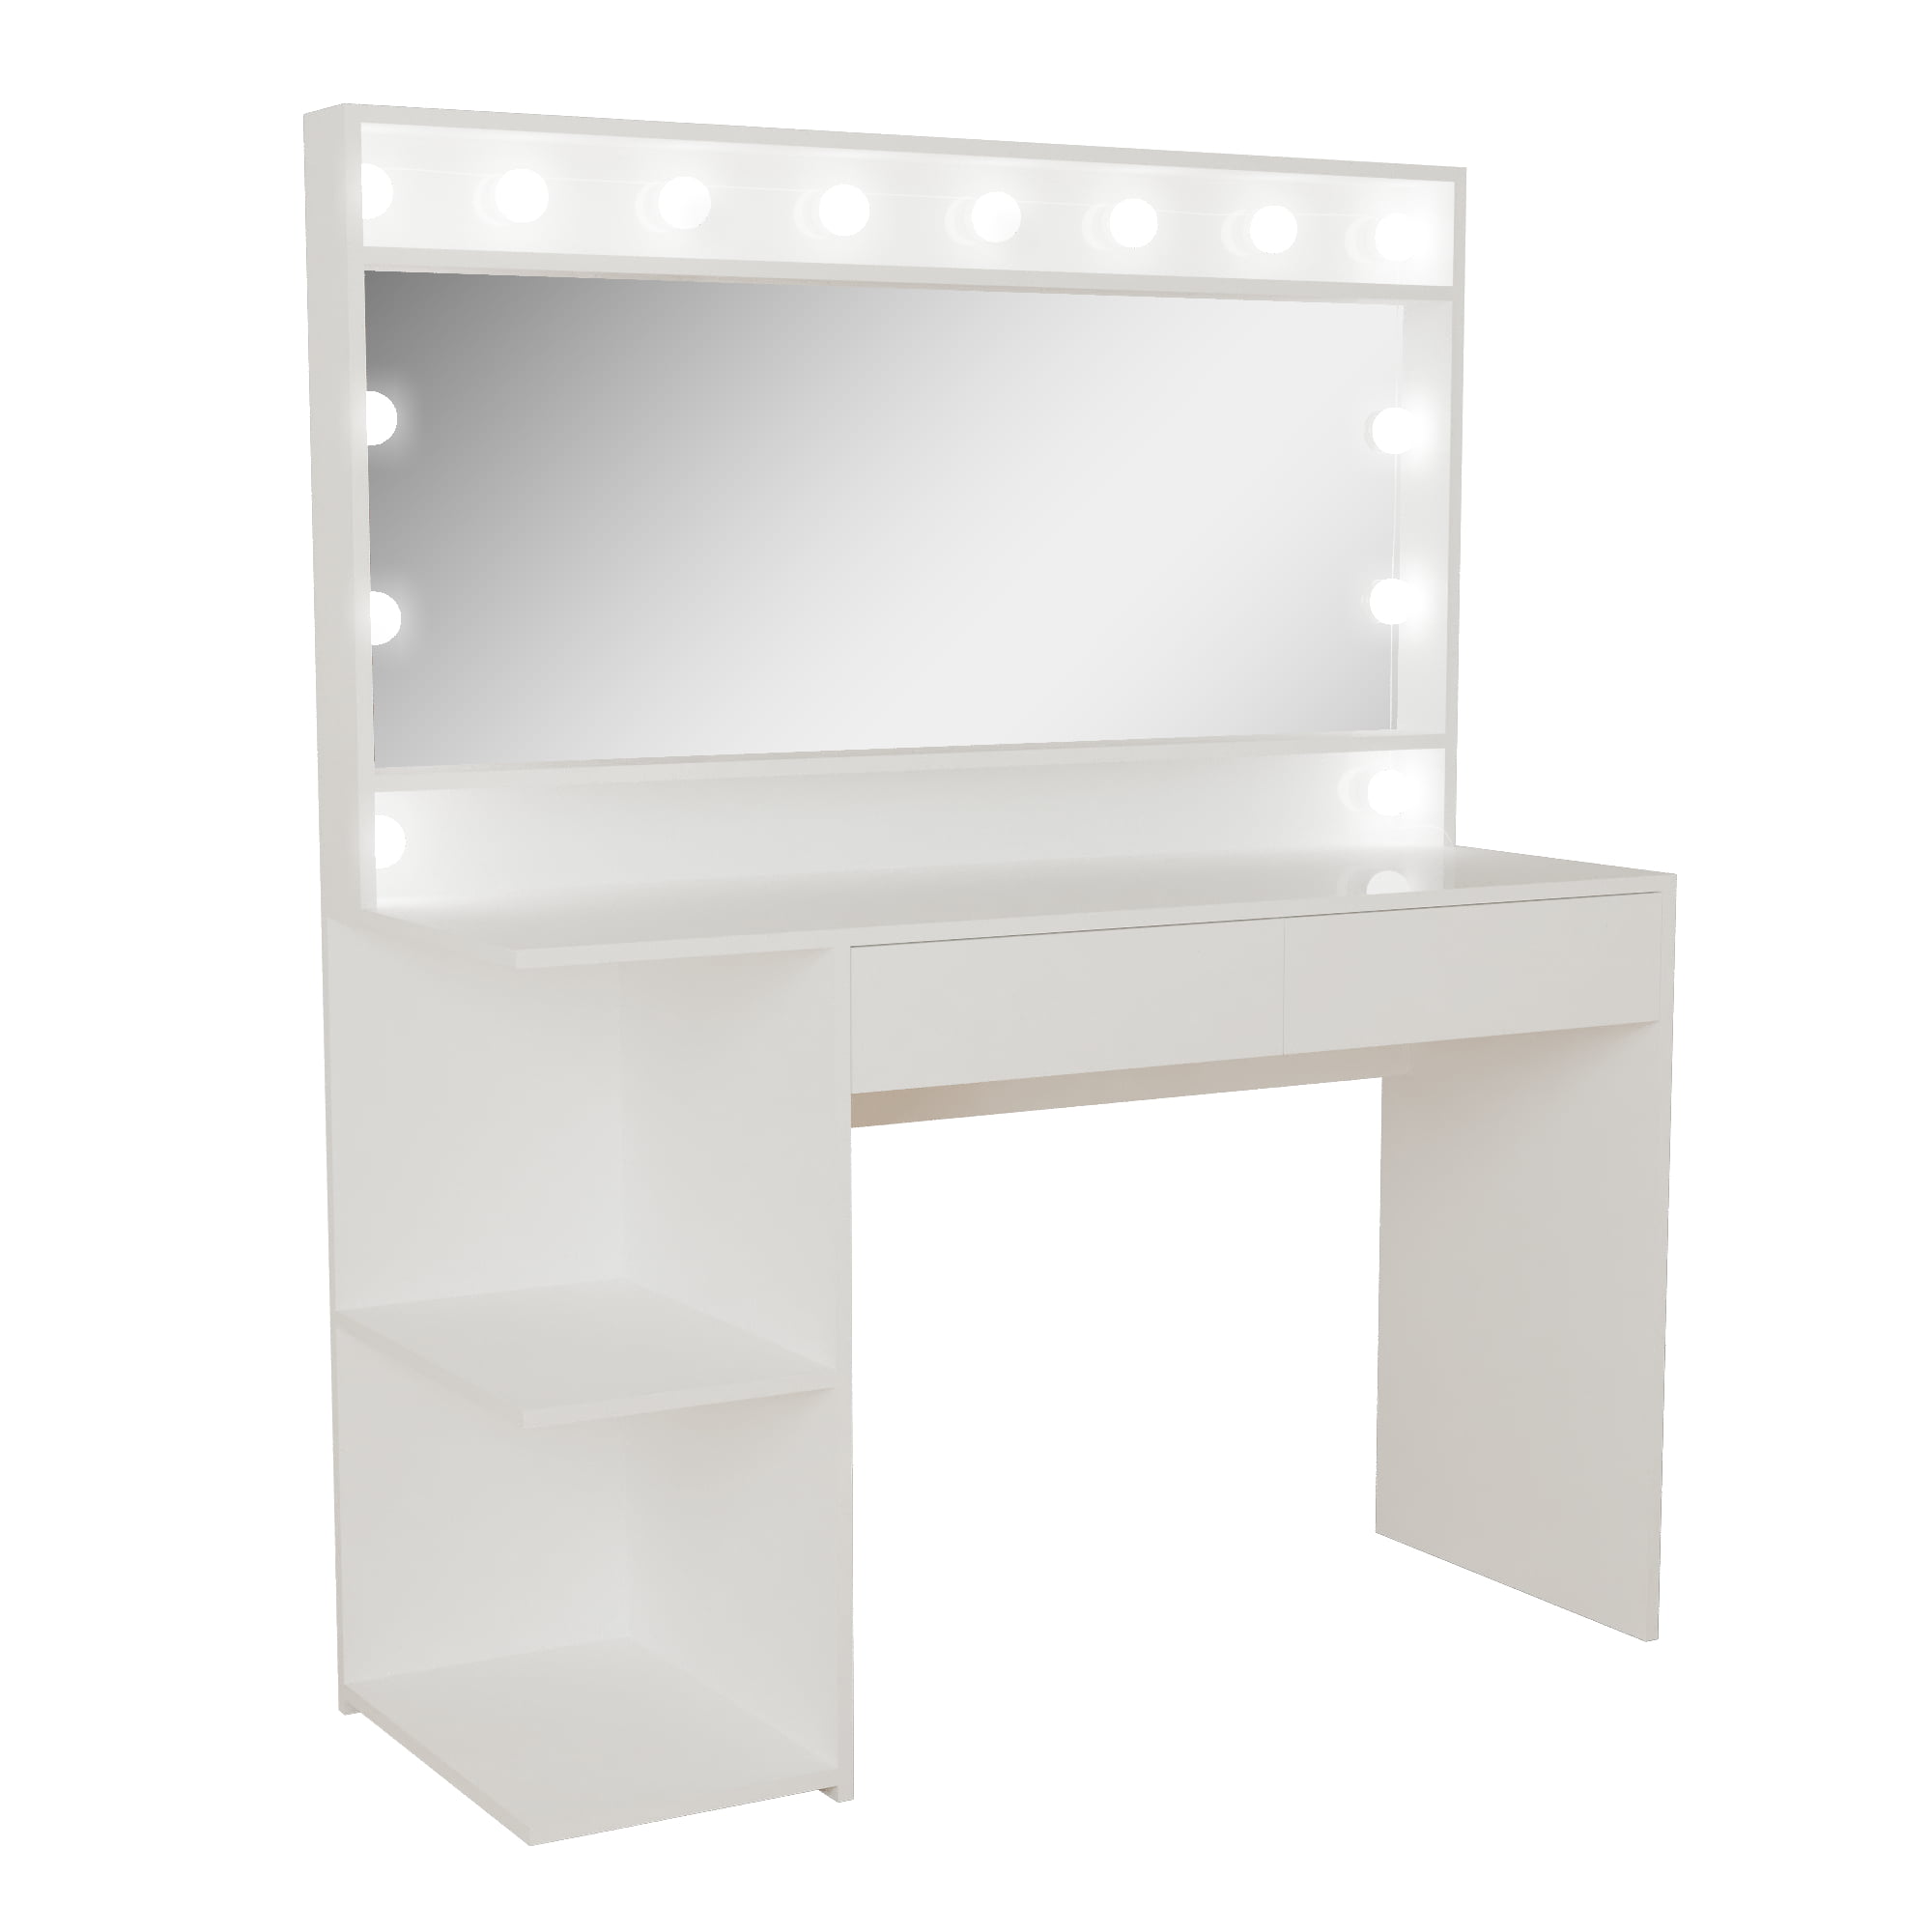 56" x 47" Ember Interiors Emery Modern Painted Vanity Table W/ LED Lights (White) $187 + Free Shipping